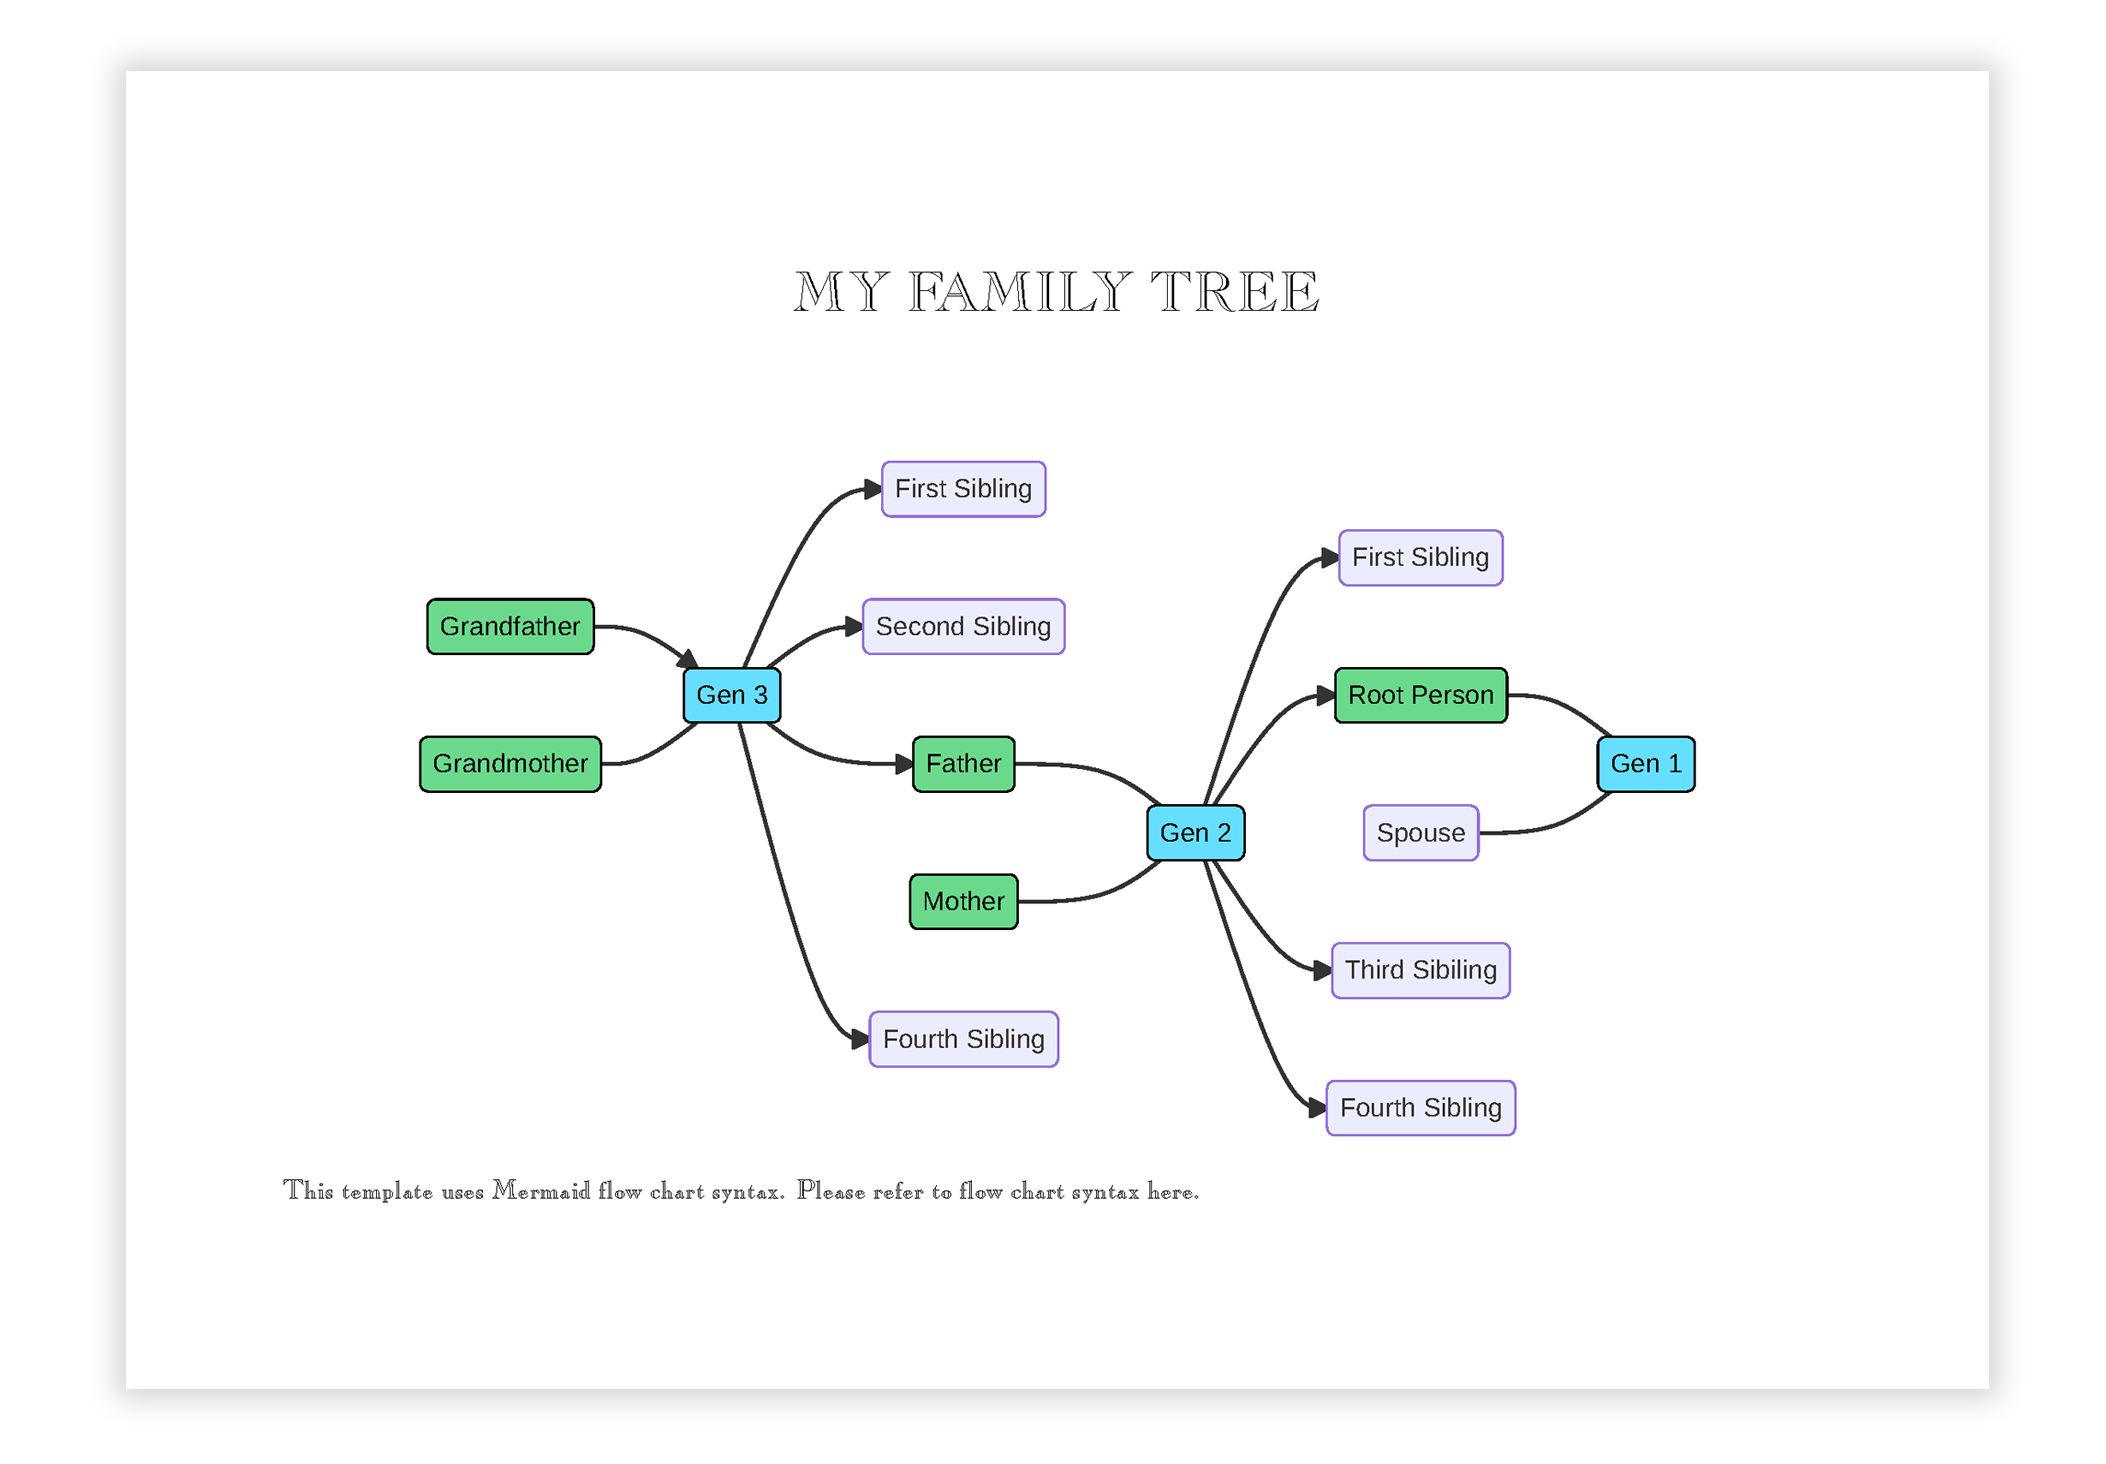 Generate your very on family tree through generations with JotterPad.